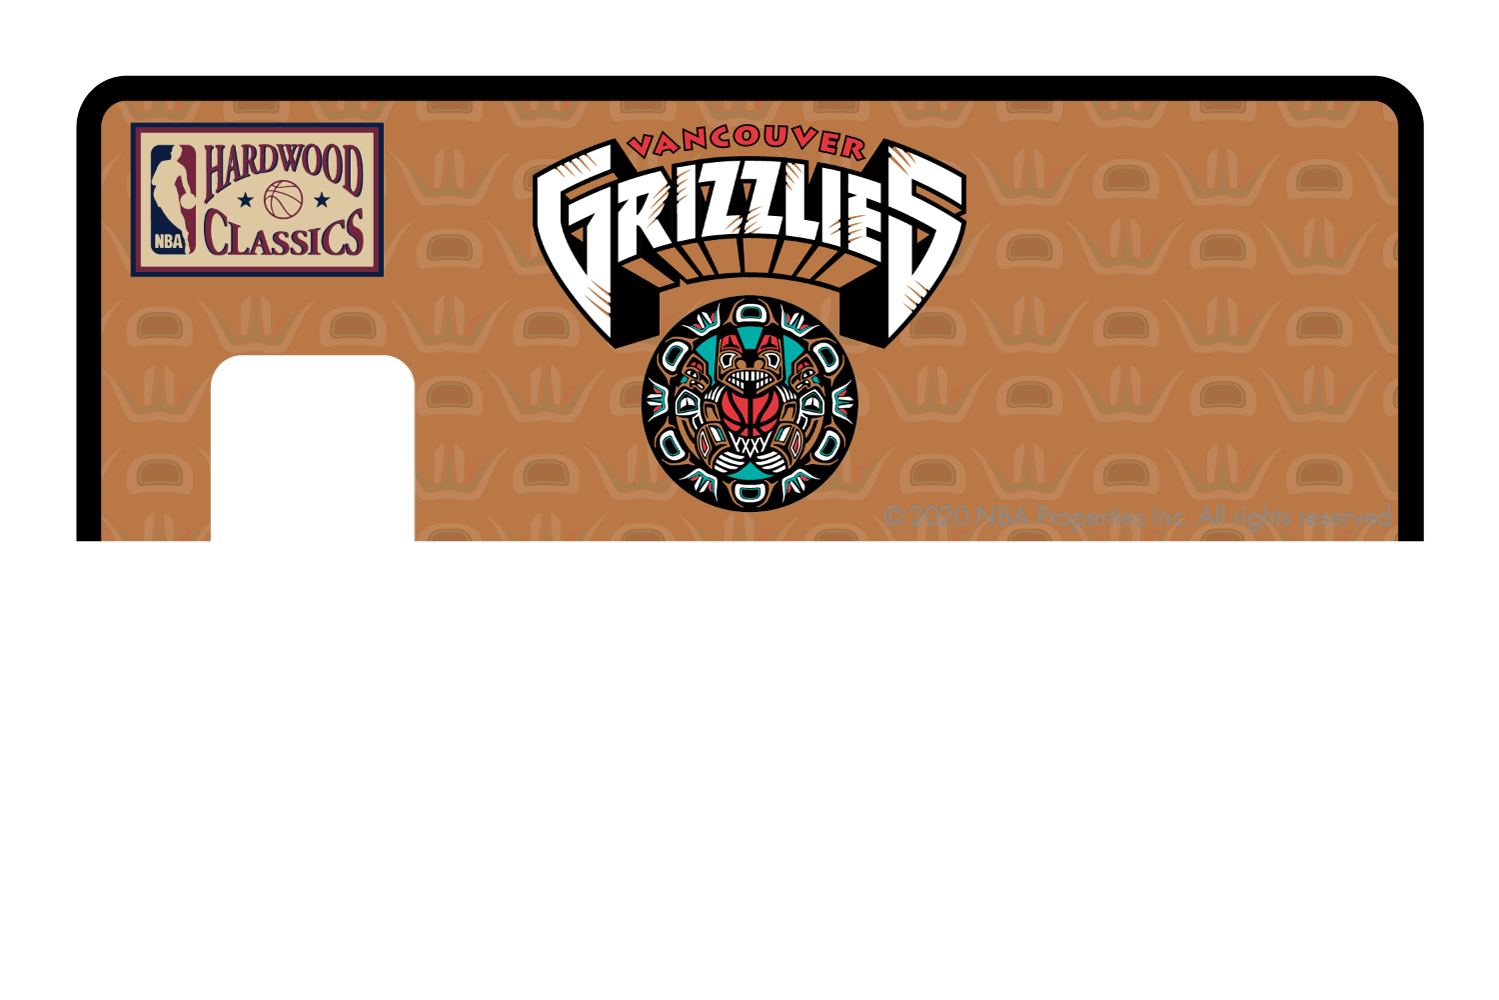 Credit Debit Card Skins | Cucu Covers - Customize Any Bank Card - Memphis Grizzlies: Throwback Hardwood Classics Full Cover / Large Chip